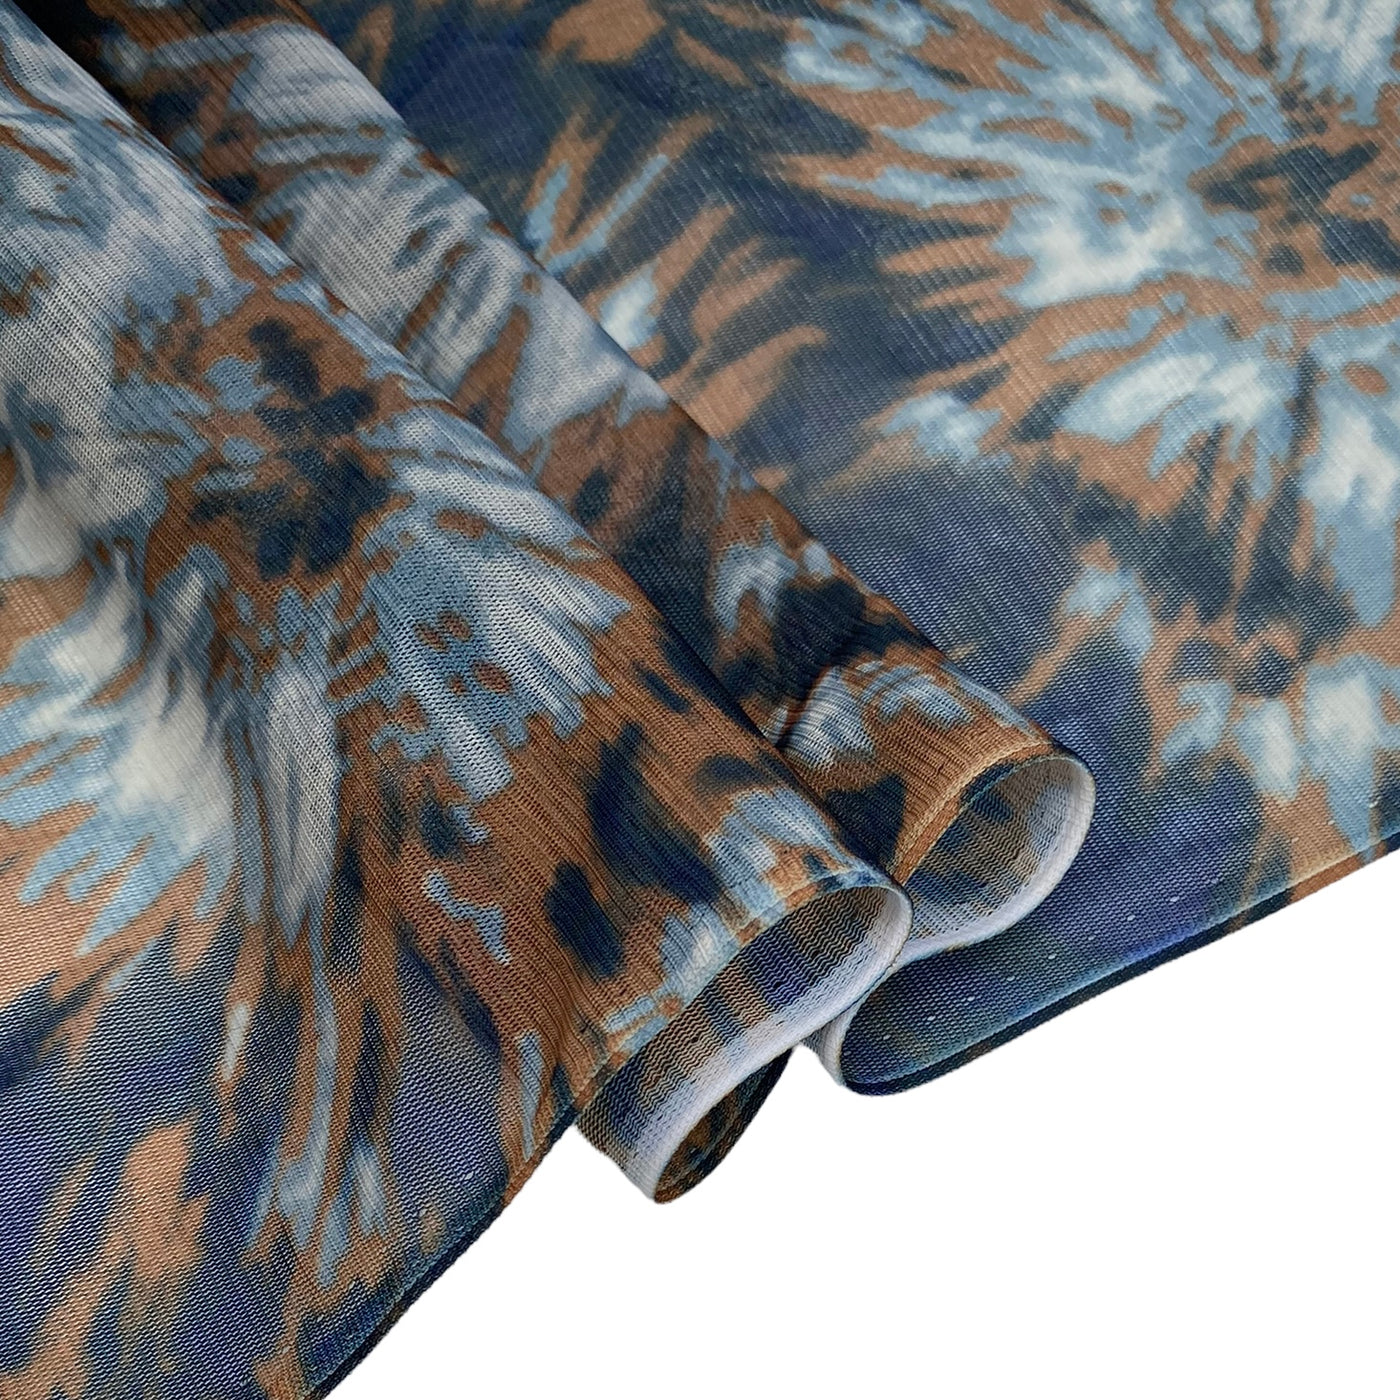 Tie Dyed Printed Stretch Mesh - Blue/Brown/White